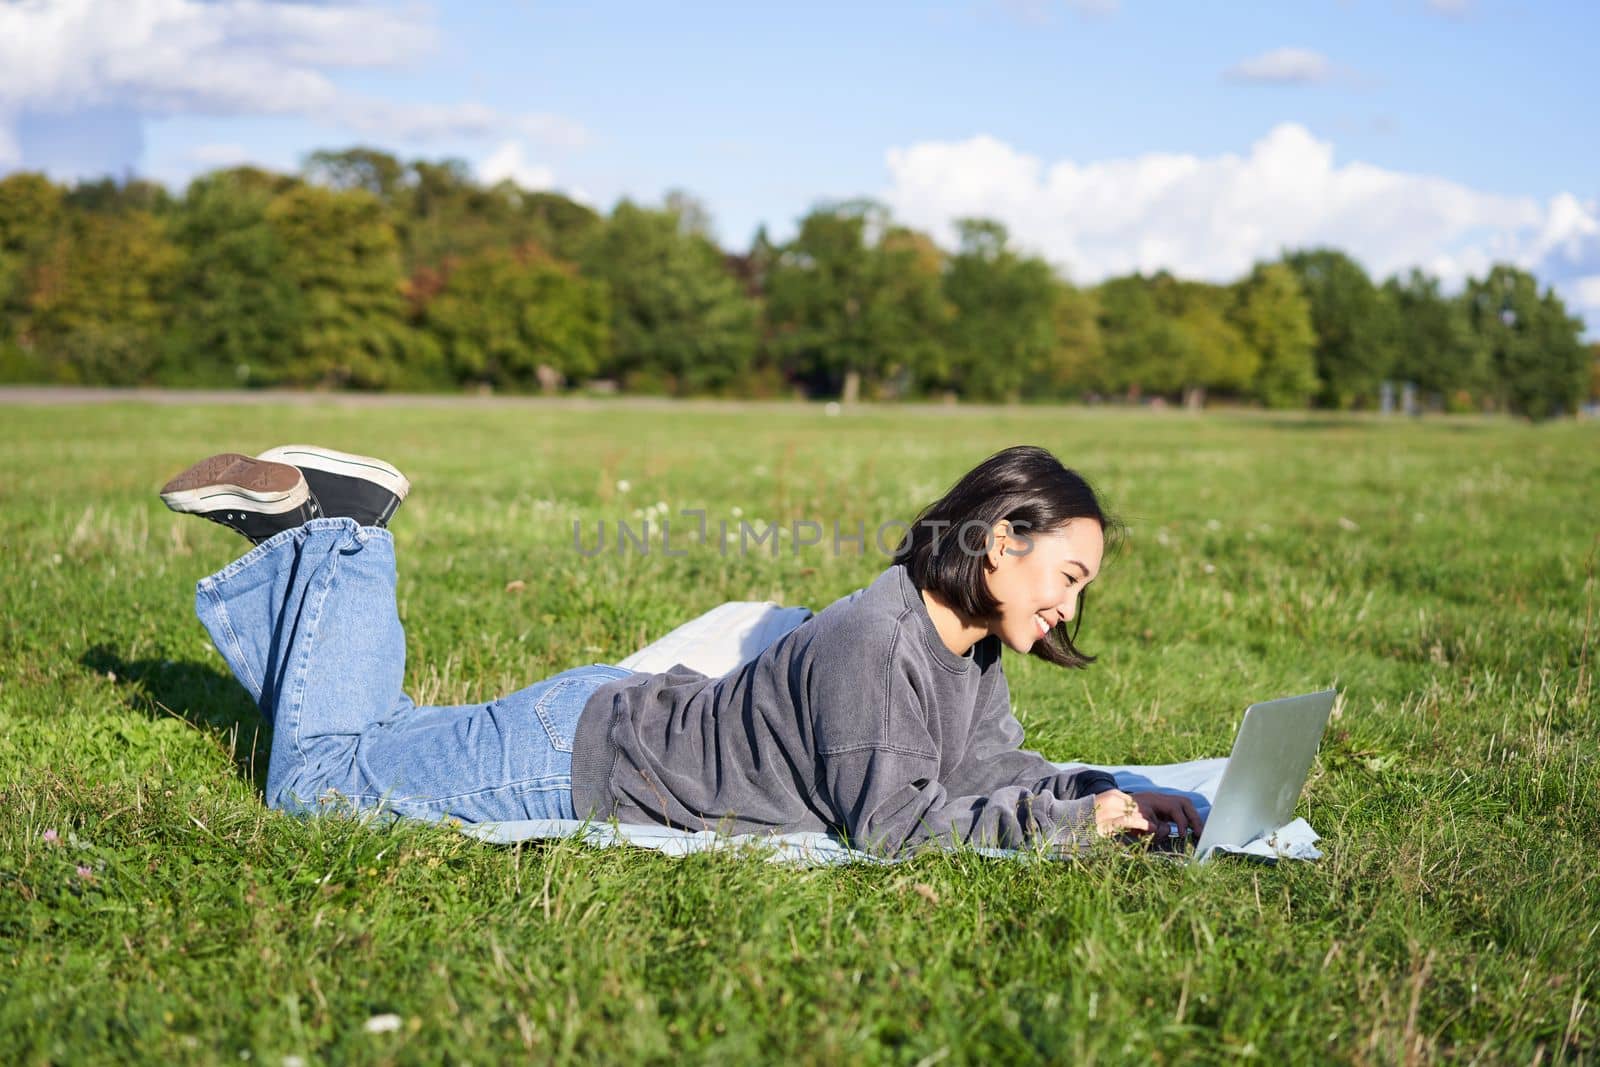 Portrait of young happy asian girl lying on blanket in park, watching videos and browsing internet on her laptop.